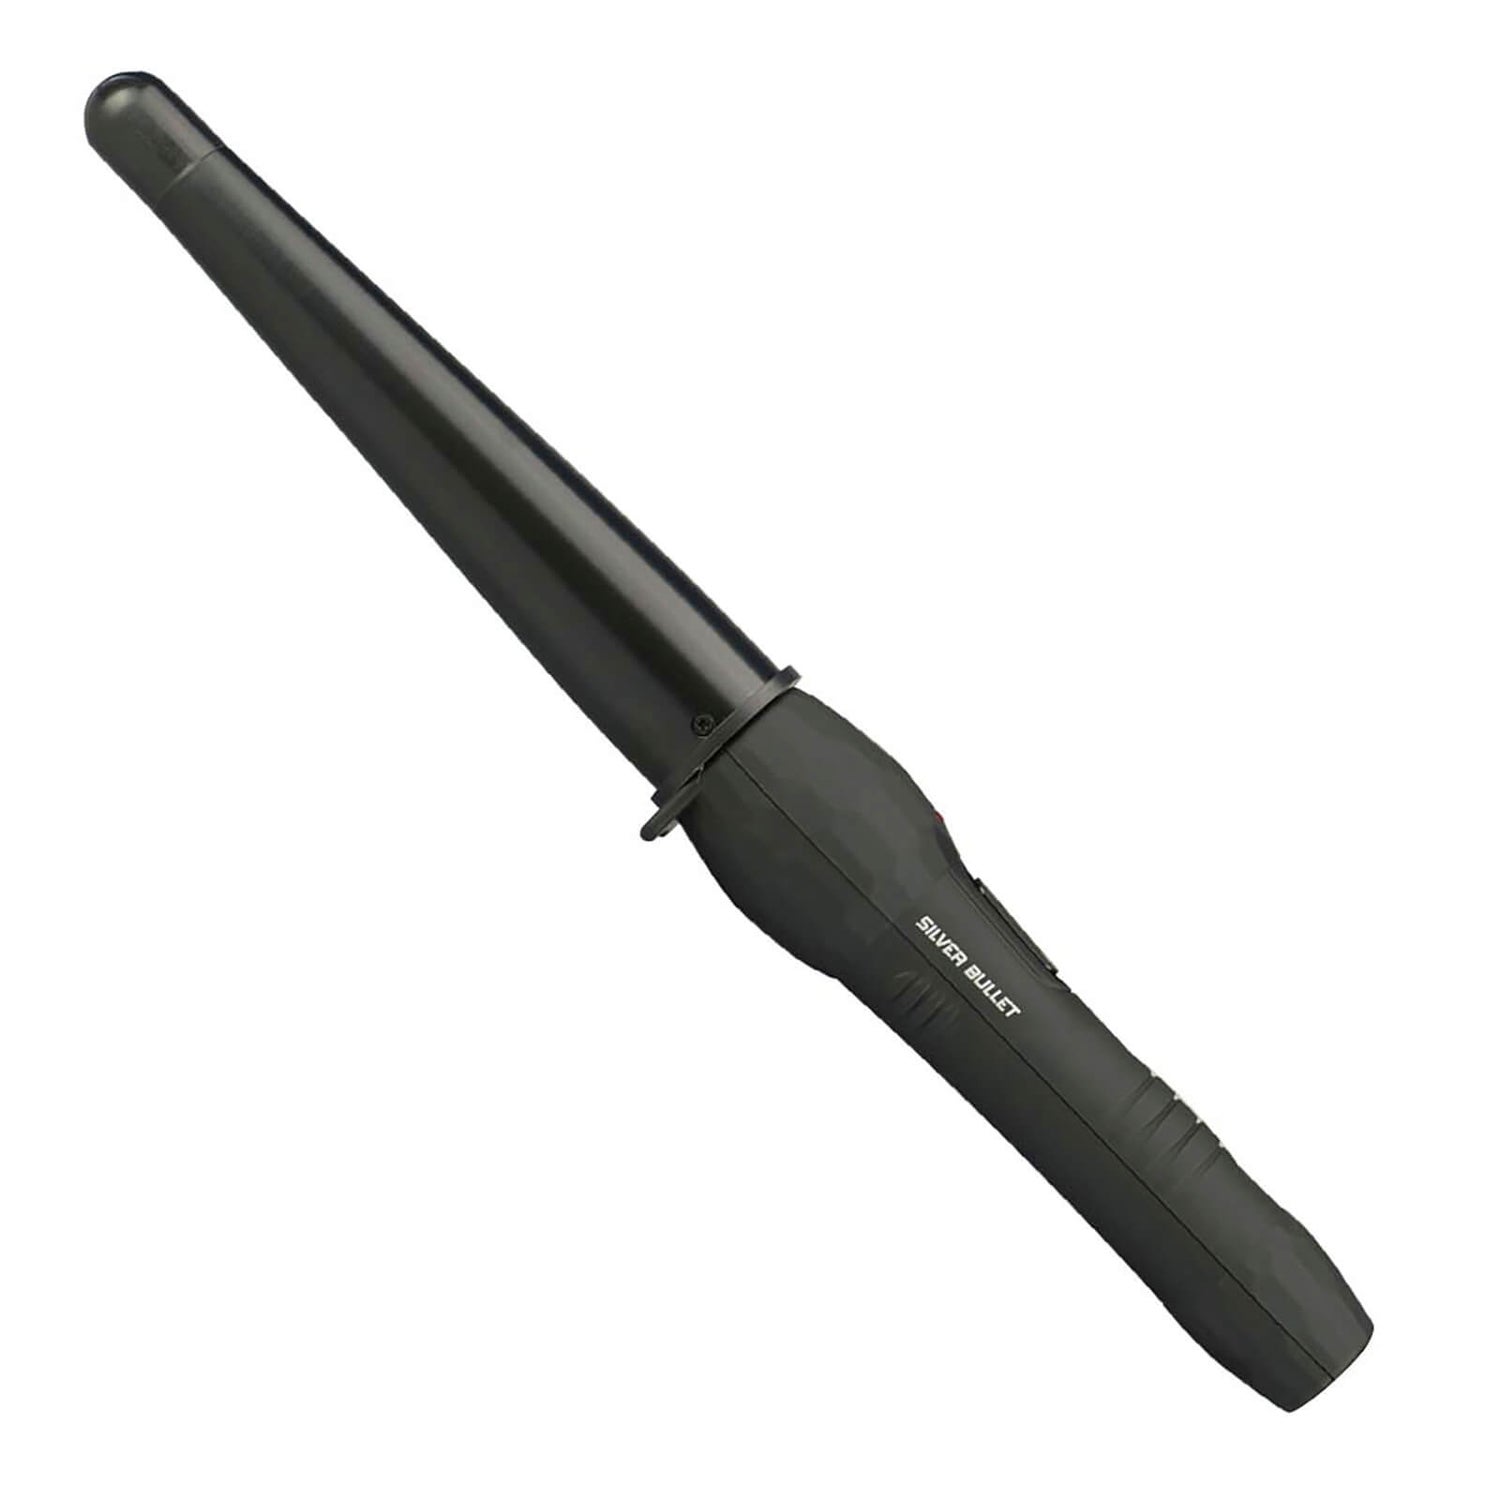 Silver Bullet Fastlane Large Ceramic Conical Hair Wand 19mm-32mm - Black